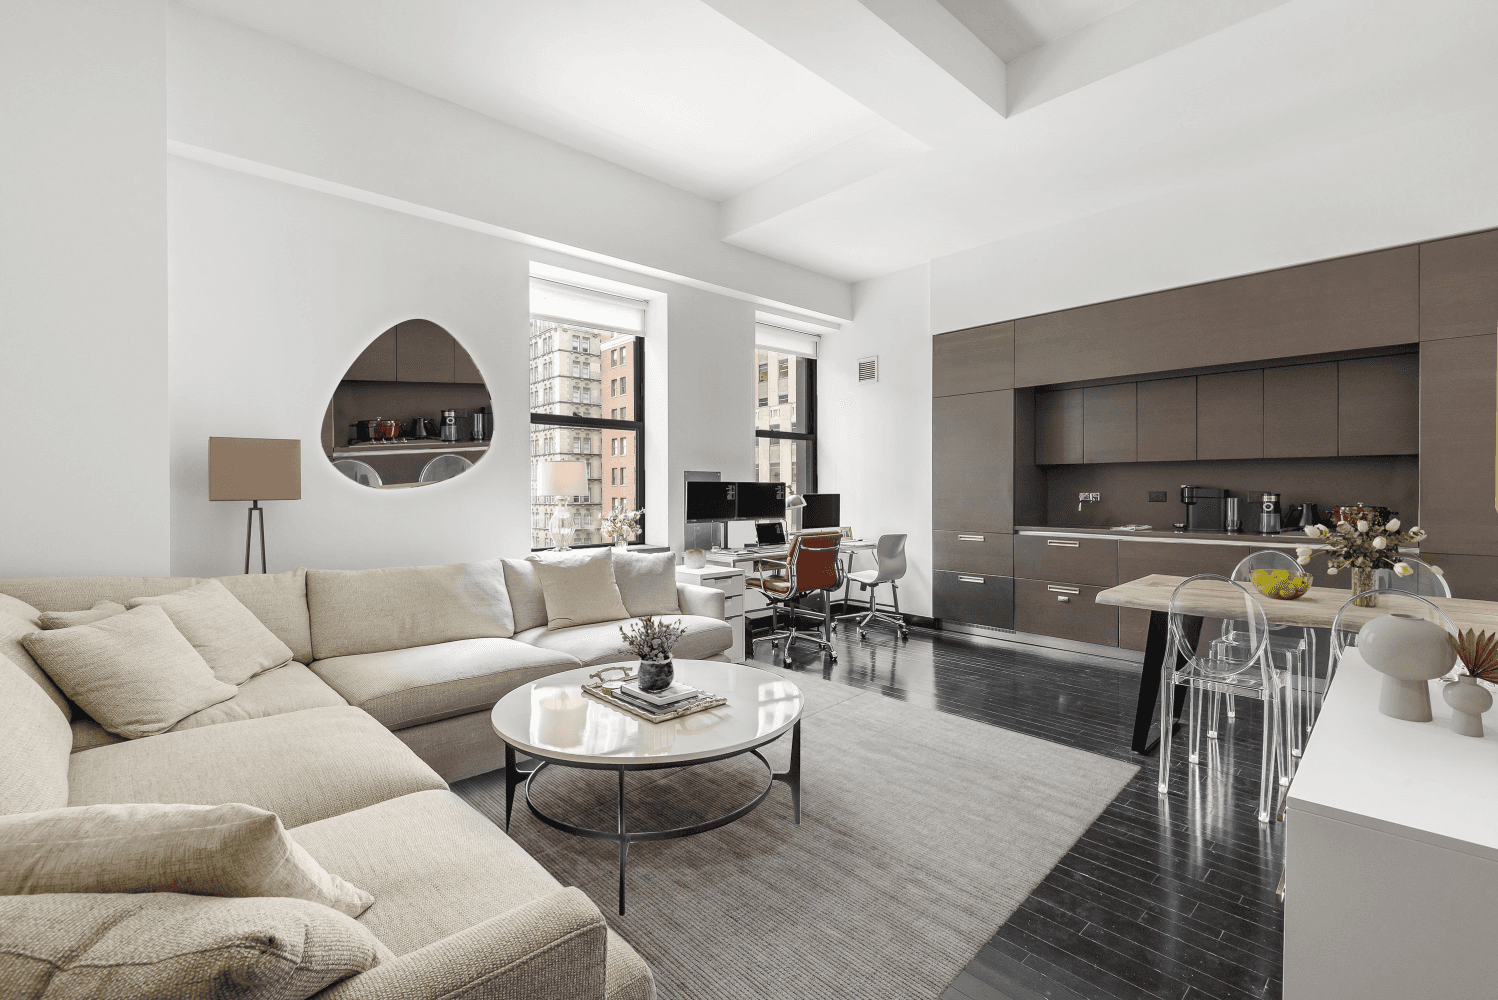 Introducing luxury living at 20 Pine Street 1019, a sophisticated one bedroom apartment boasting impressive 12 foot ceilings and a serene eastern exposure offering expansive views of Chase Plaza.